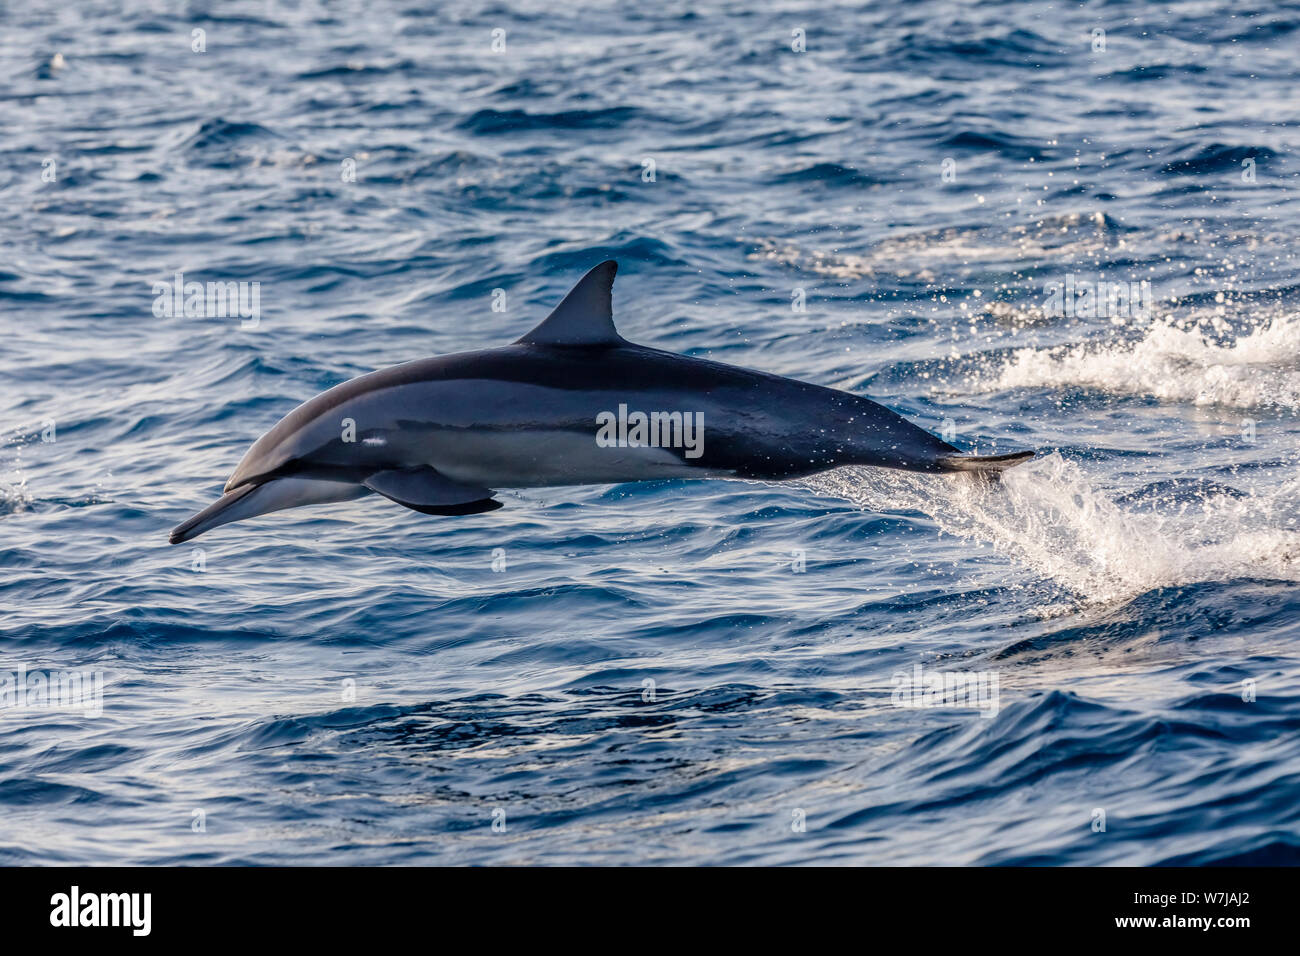 A spinner dolphin (Stenella longirostris) leaps out of the waves at high speed, seen while whale watching at Weligama on the south coast of Sri Lanka Stock Photo